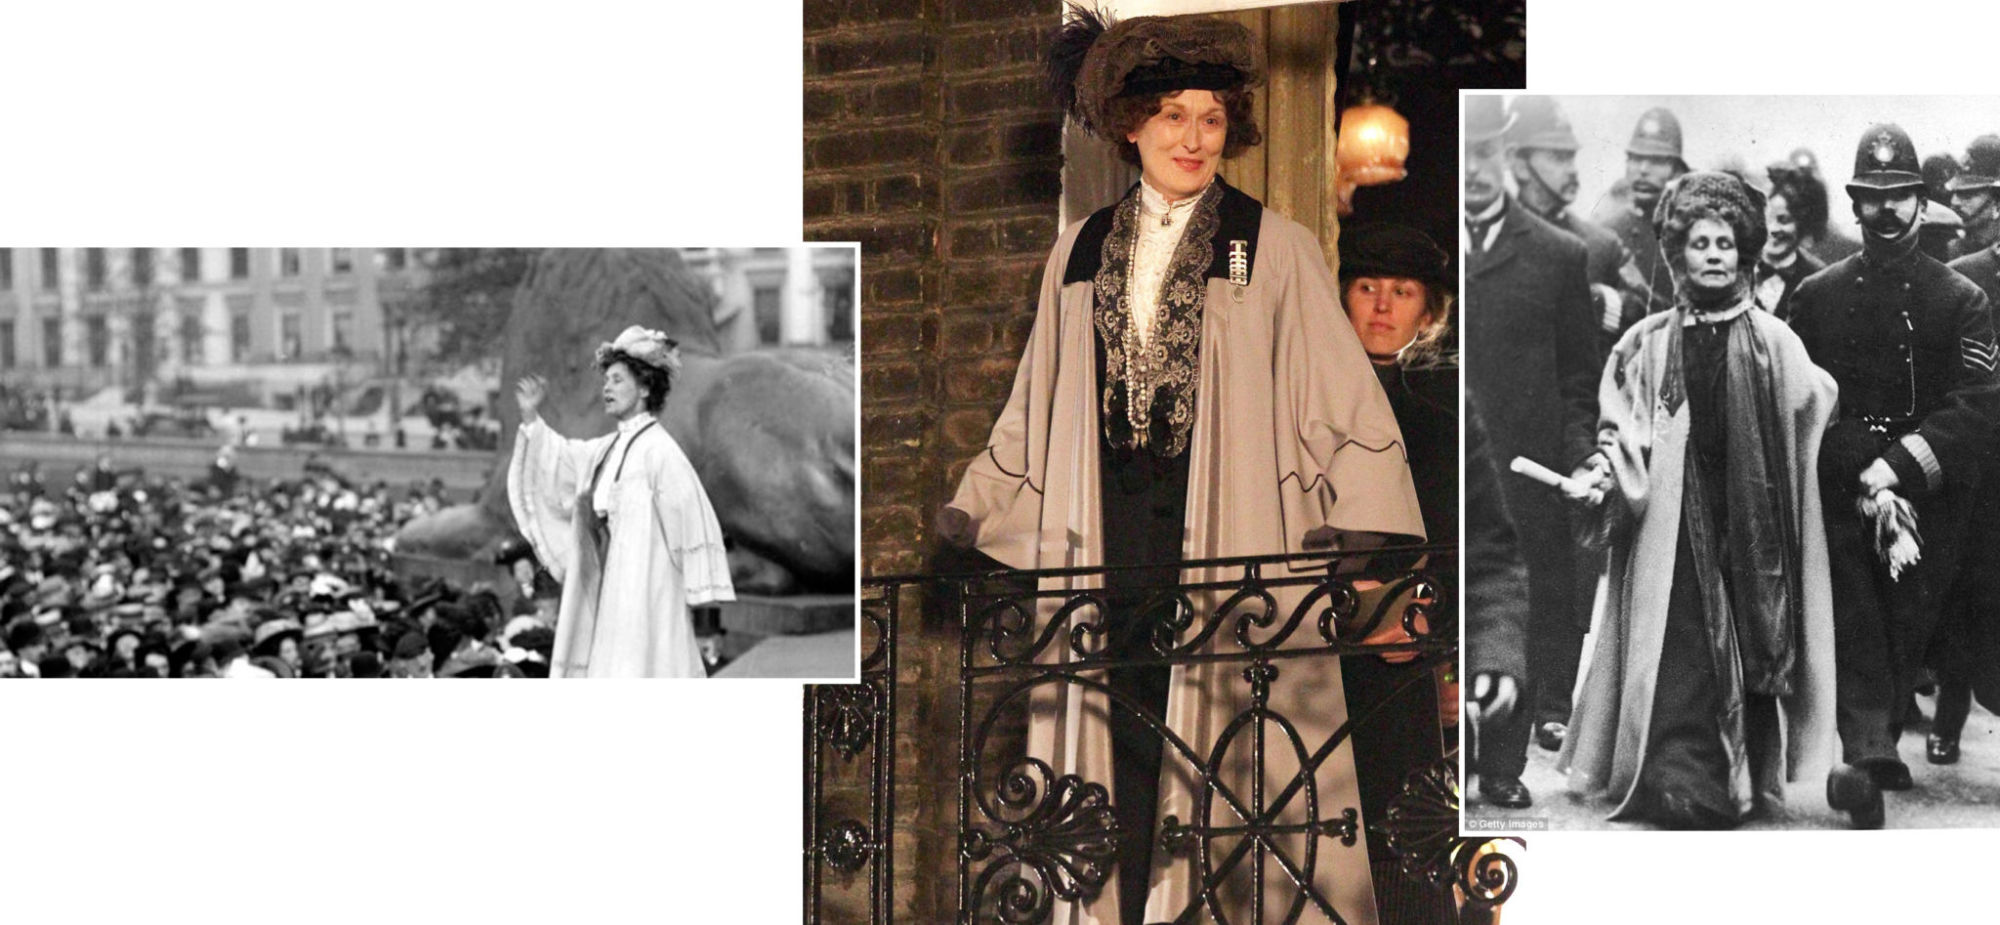 the-italian-rêve-movies-with-style-suffragette-meryl-streep-pankrust